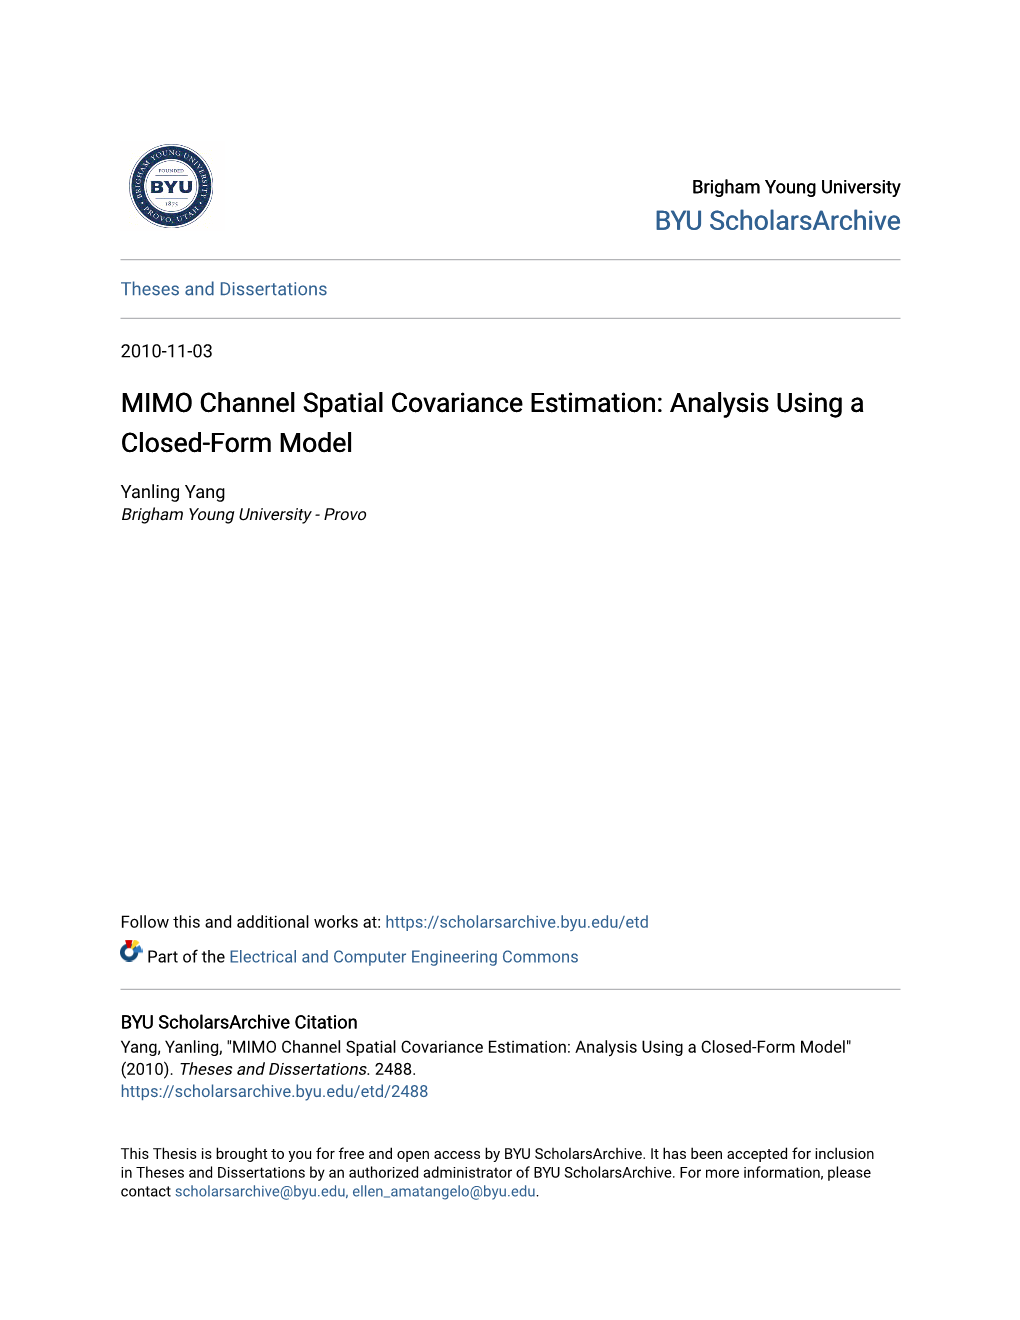 MIMO Channel Spatial Covariance Estimation: Analysis Using a Closed-Form Model